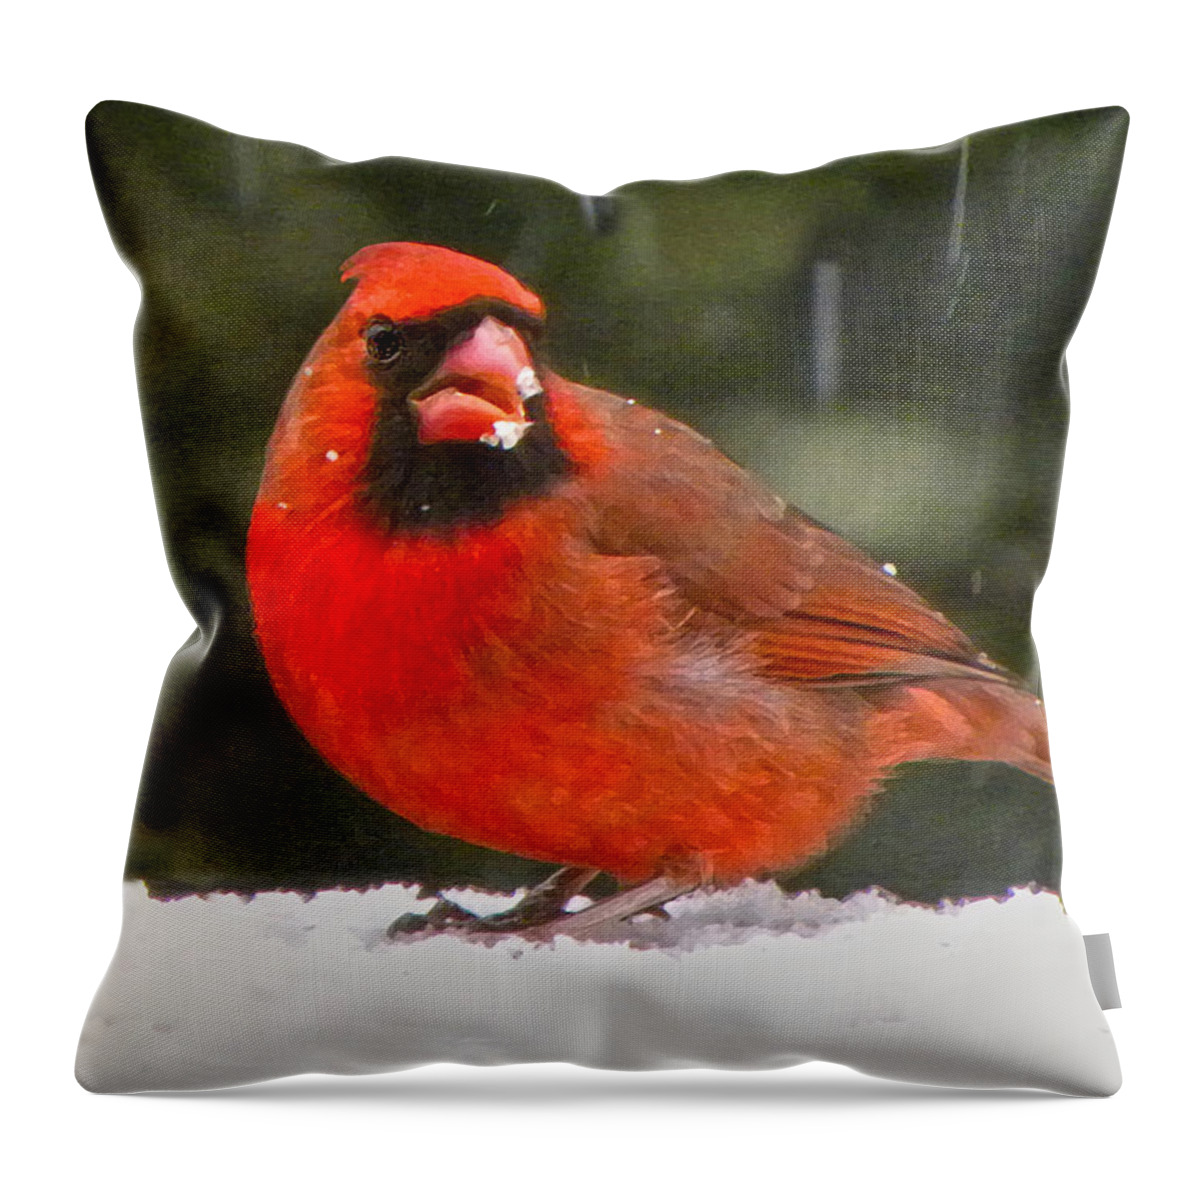 Northern Cardinal Throw Pillow featuring the photograph Cardinal In The Snowstorm by Sandi OReilly